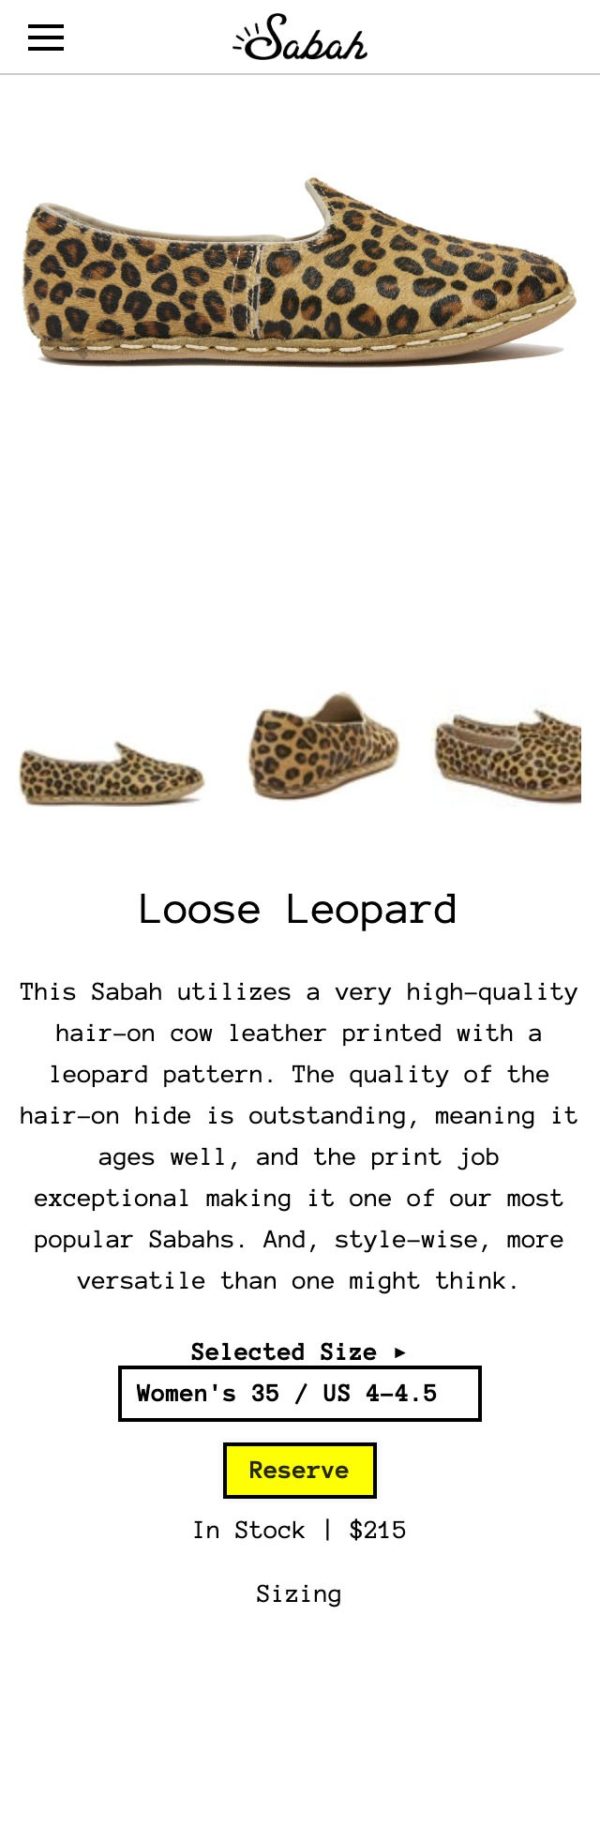 Screenshot of the Sabah website's product page